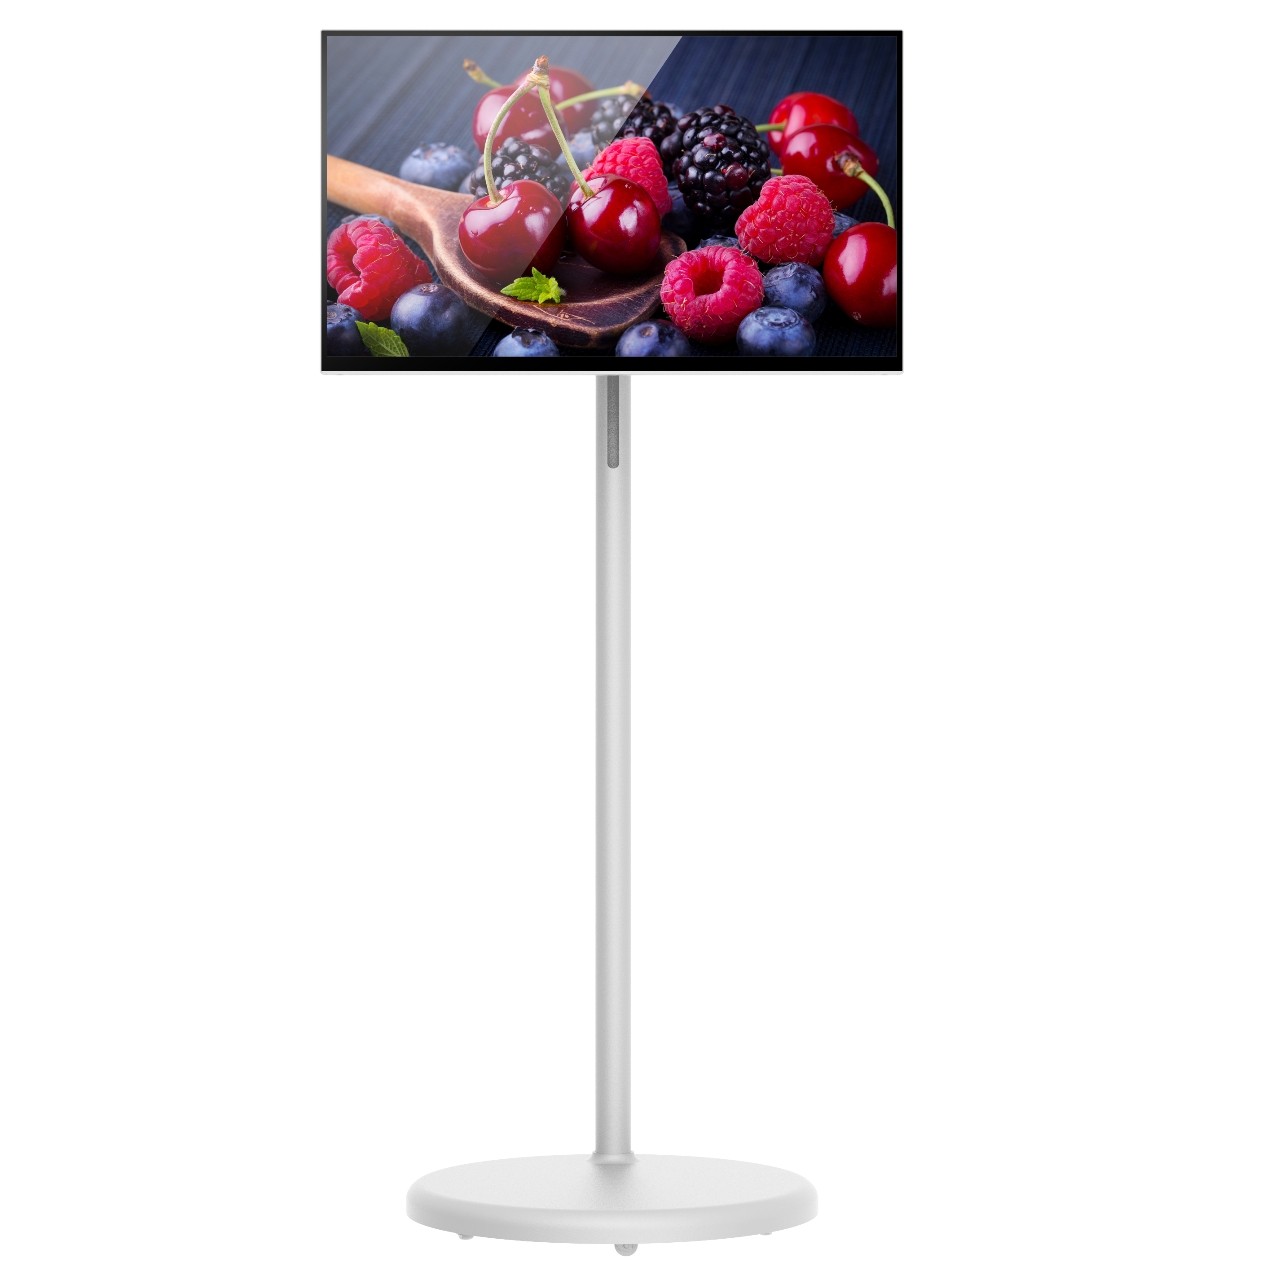 27inch standby me smart display